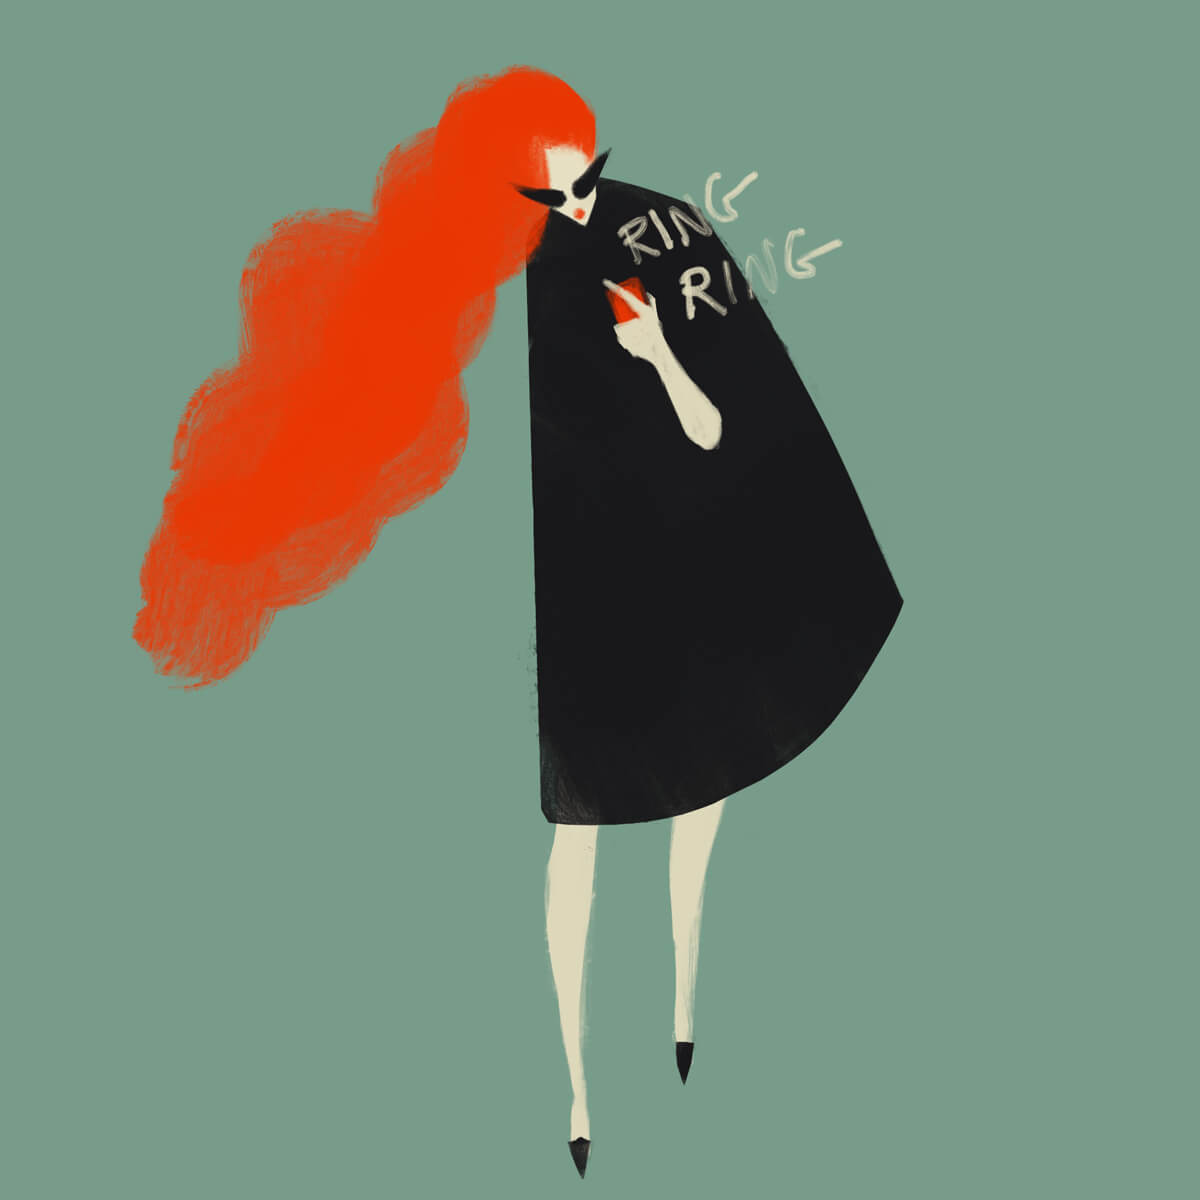 Ring Ring getting a phone call. Lady in Red Cape Style Character Study.